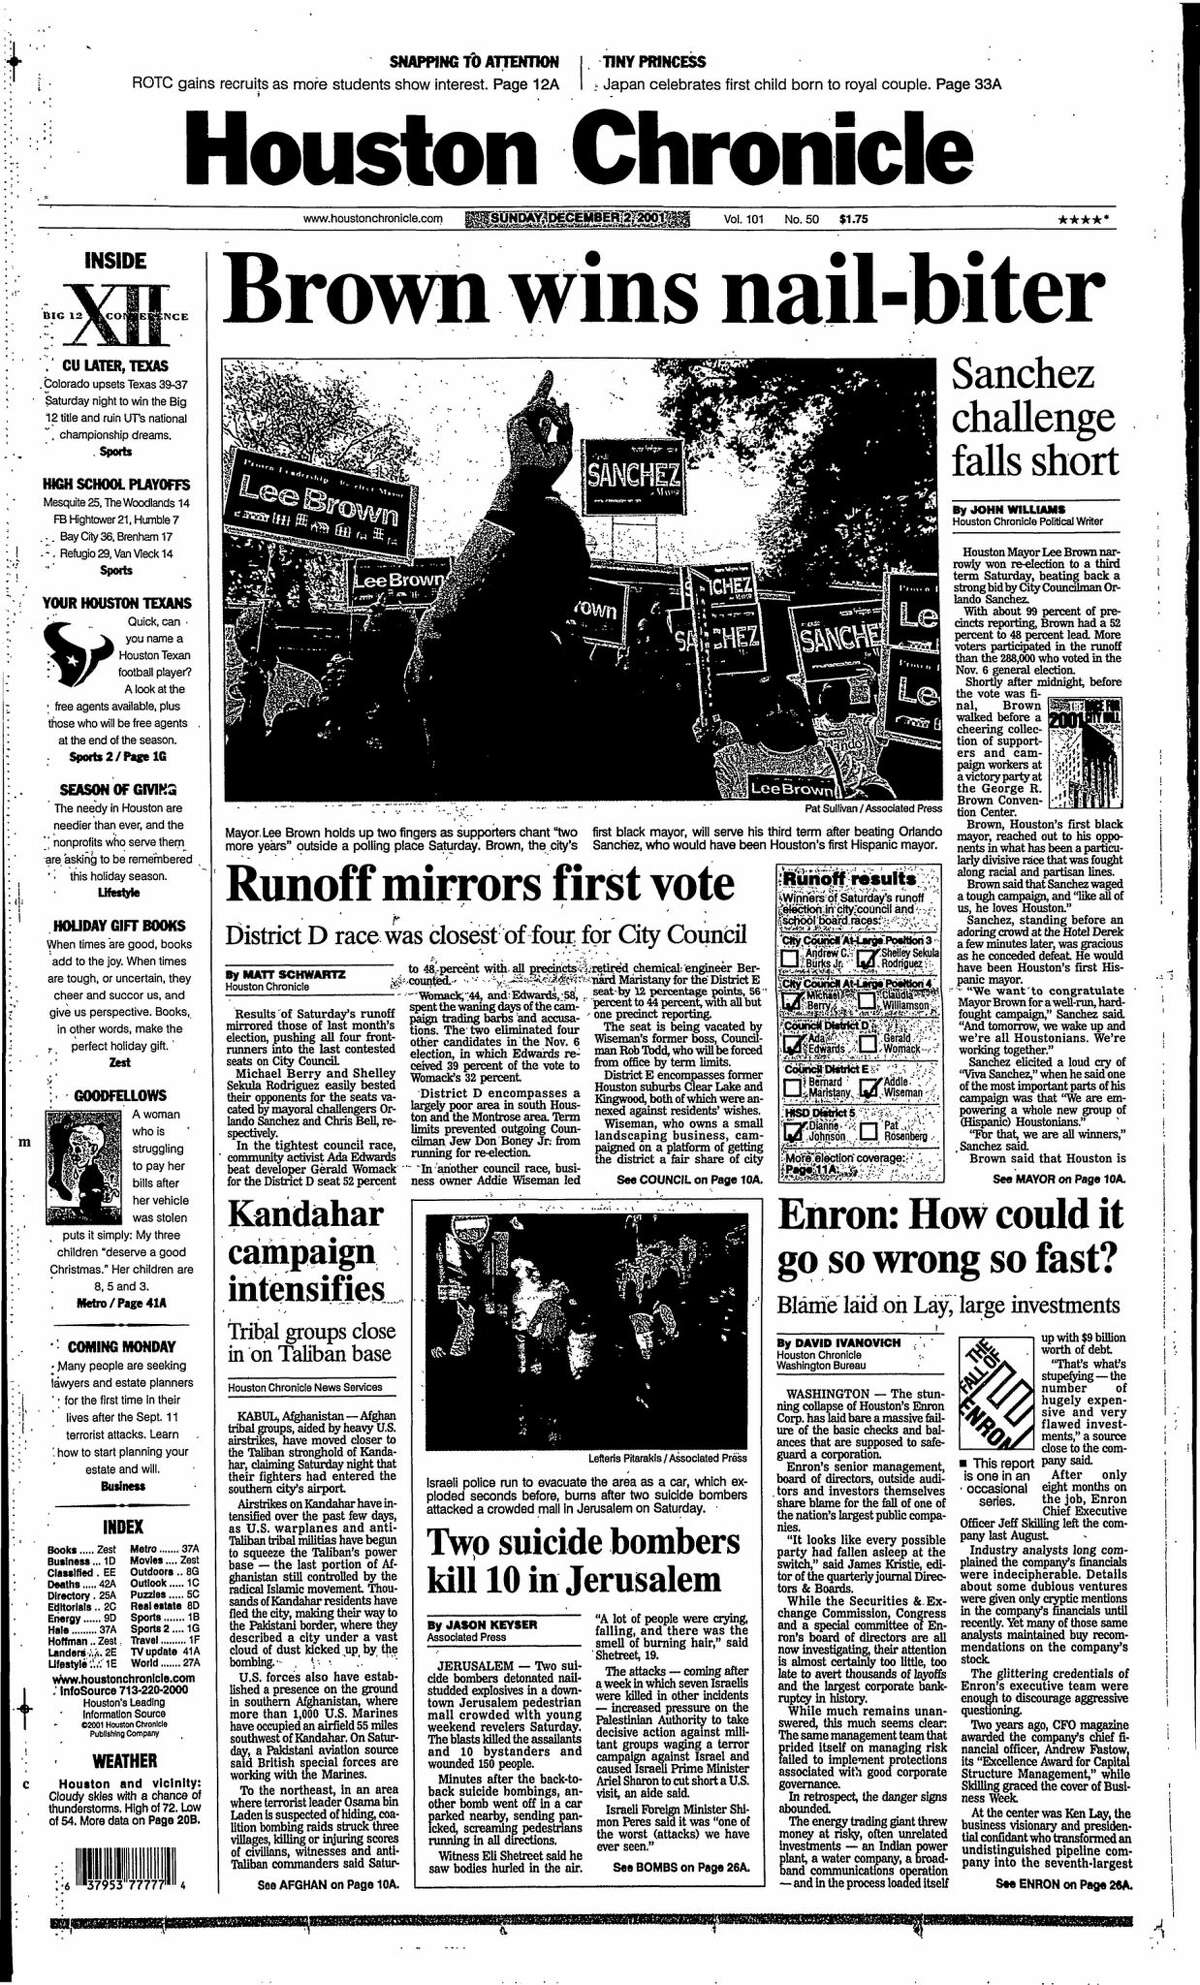 Houston Chronicle front page from Dec. 2, 2001.